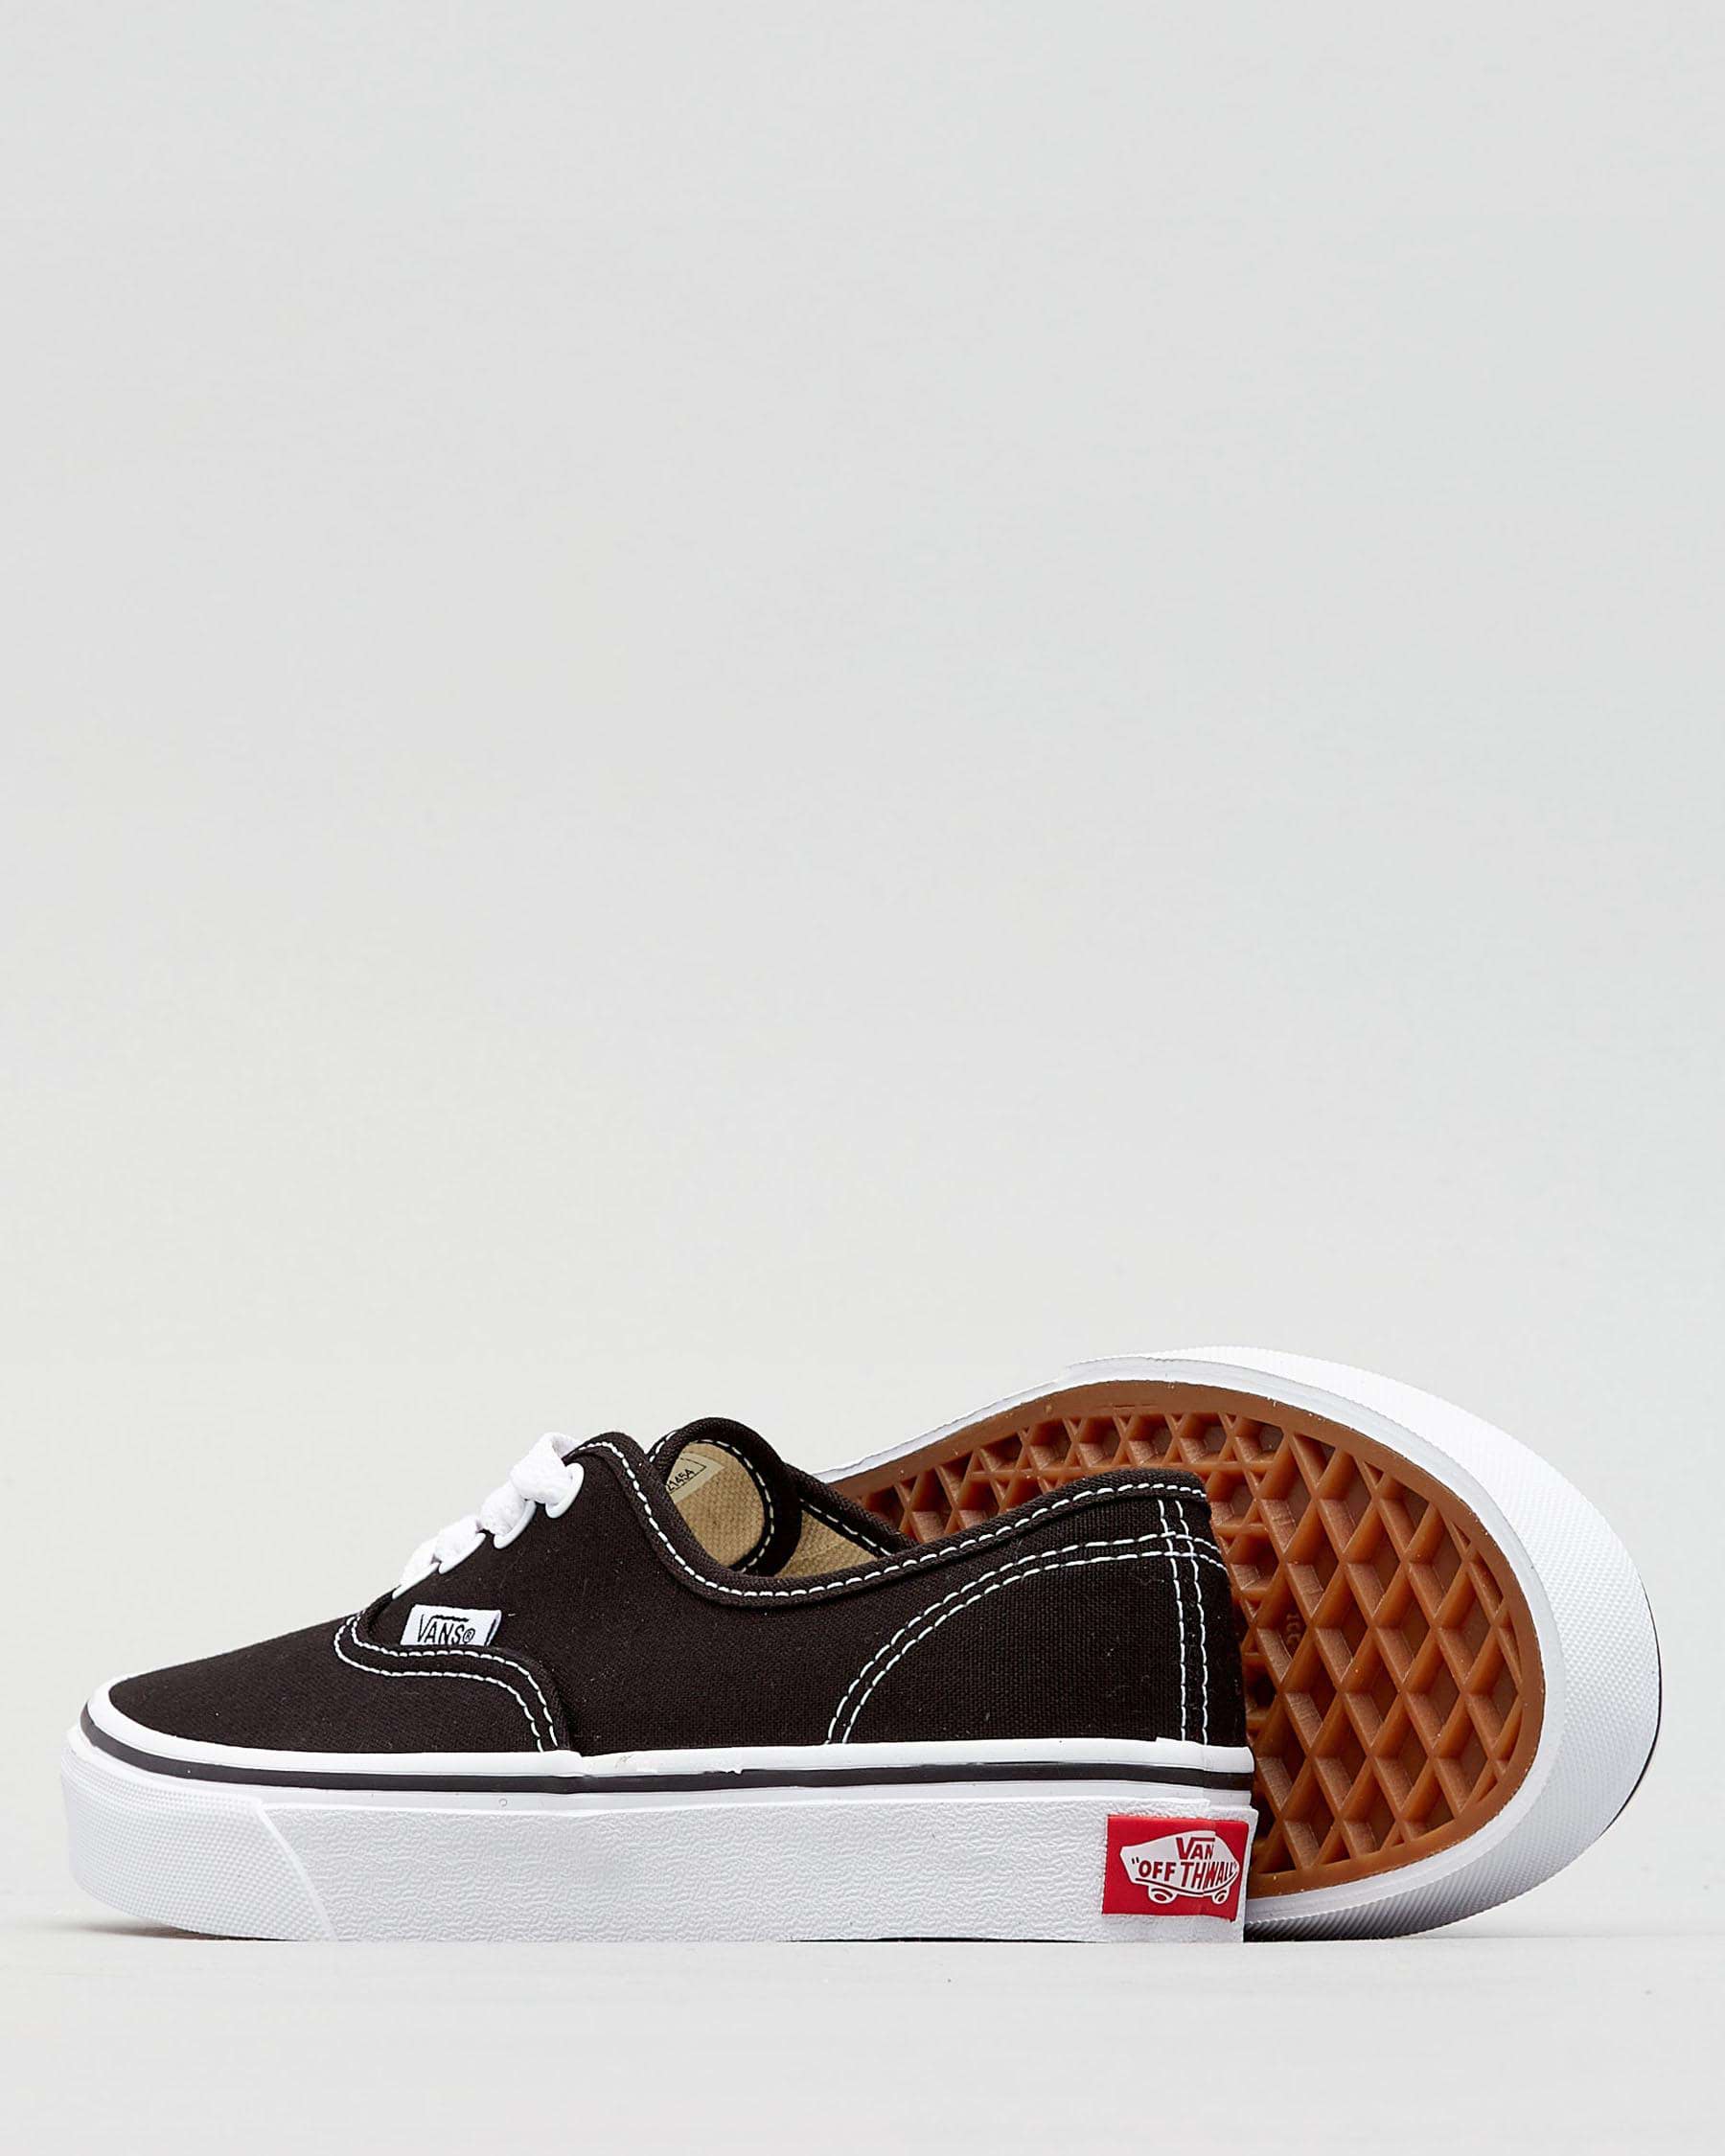 Vans Girls Authentic Shoes In Black/ White - Fast Shipping & Easy ...